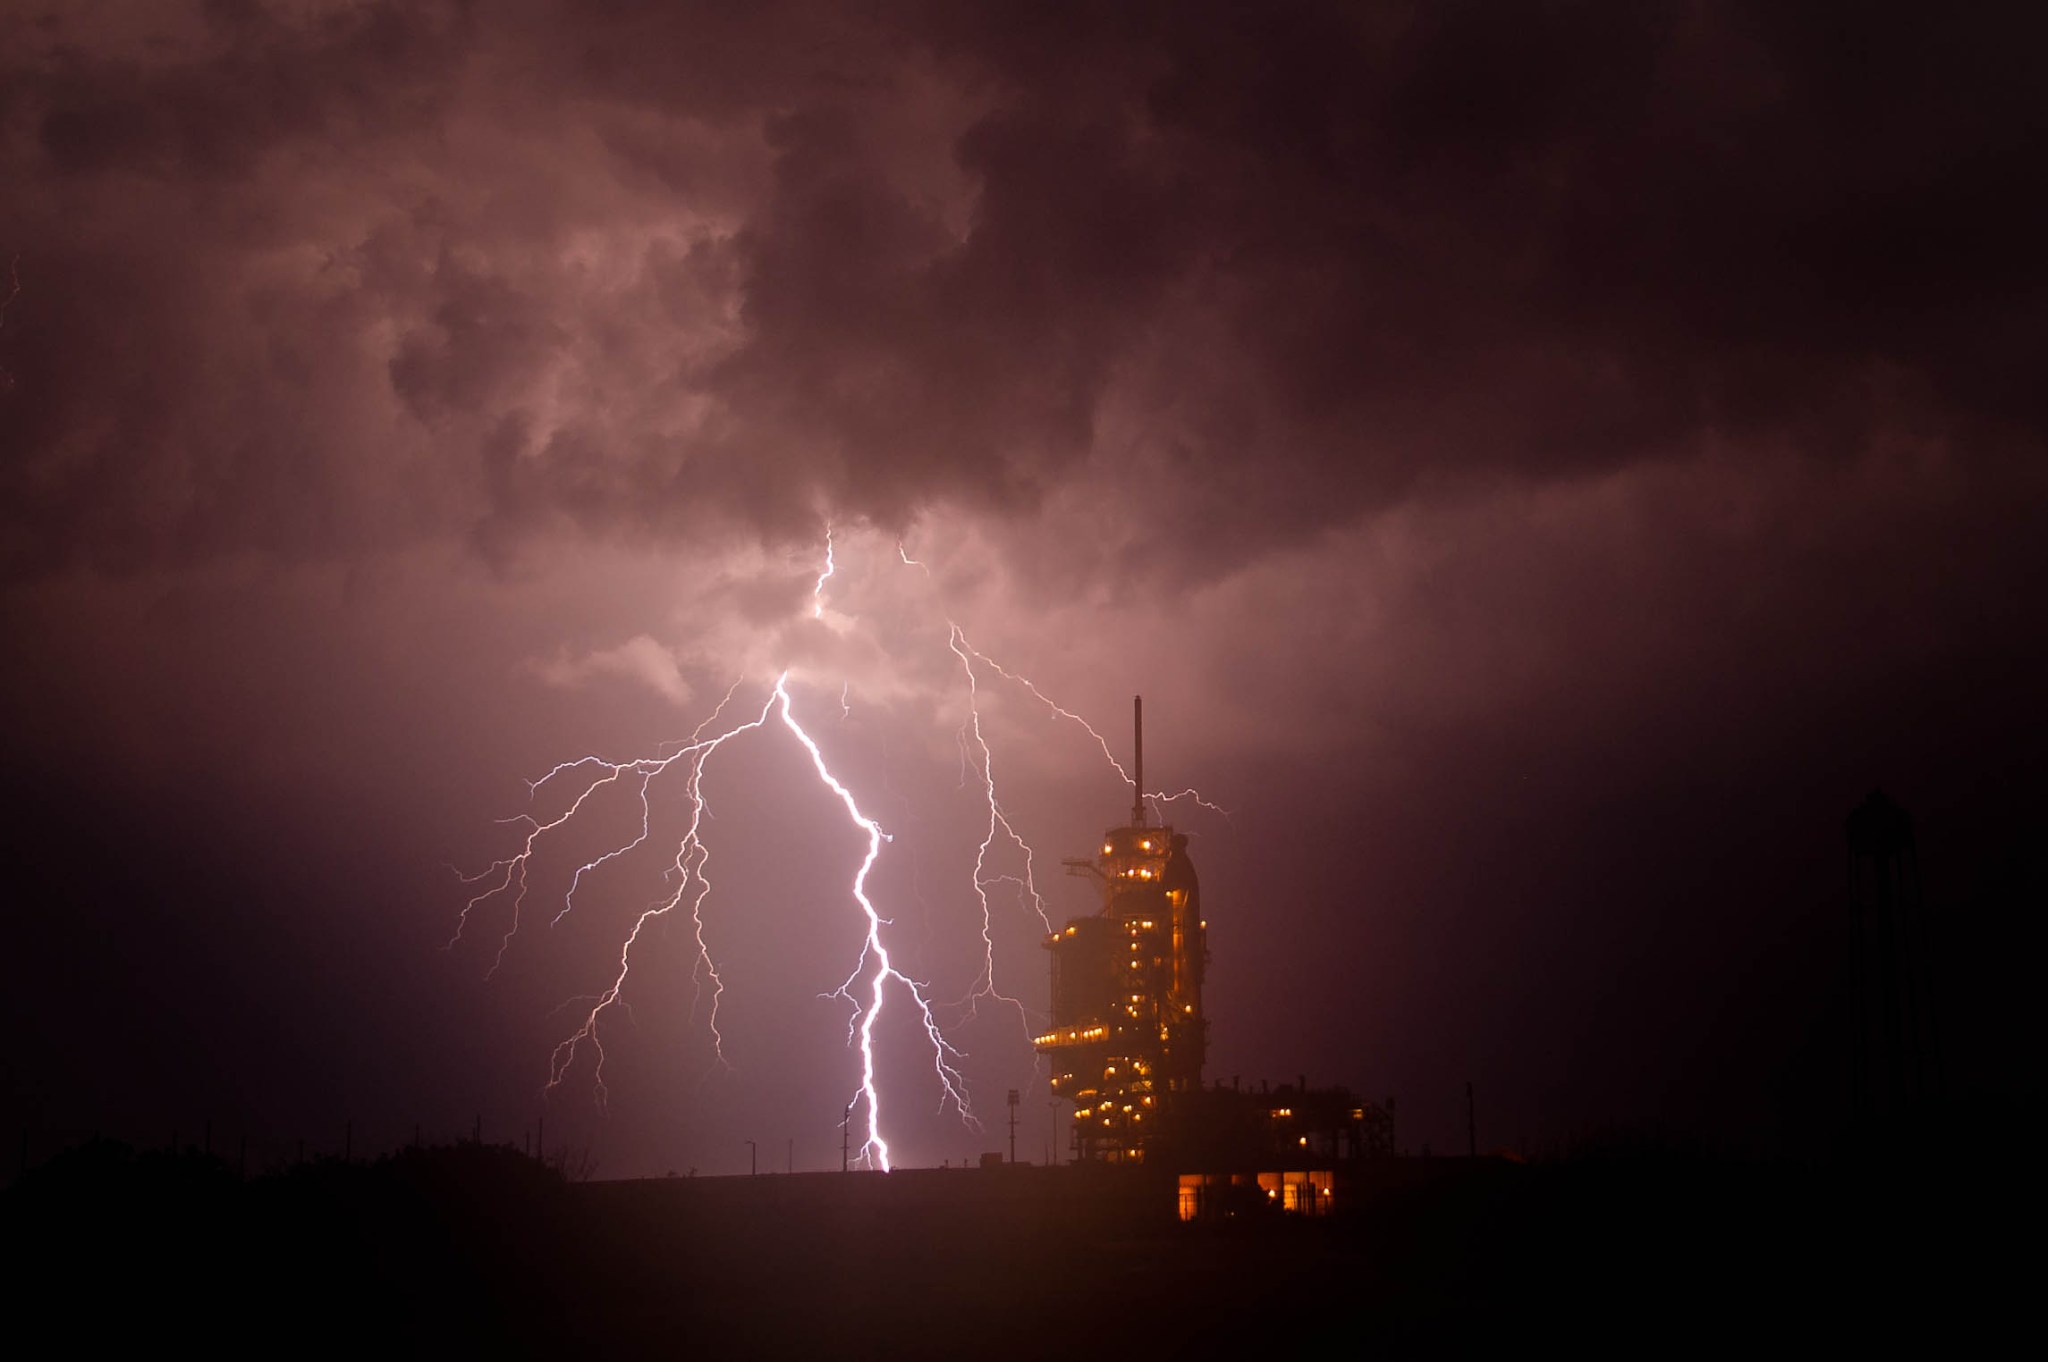 The space shuttle Endeavour is seen on launch pad 39 with lightning in the background